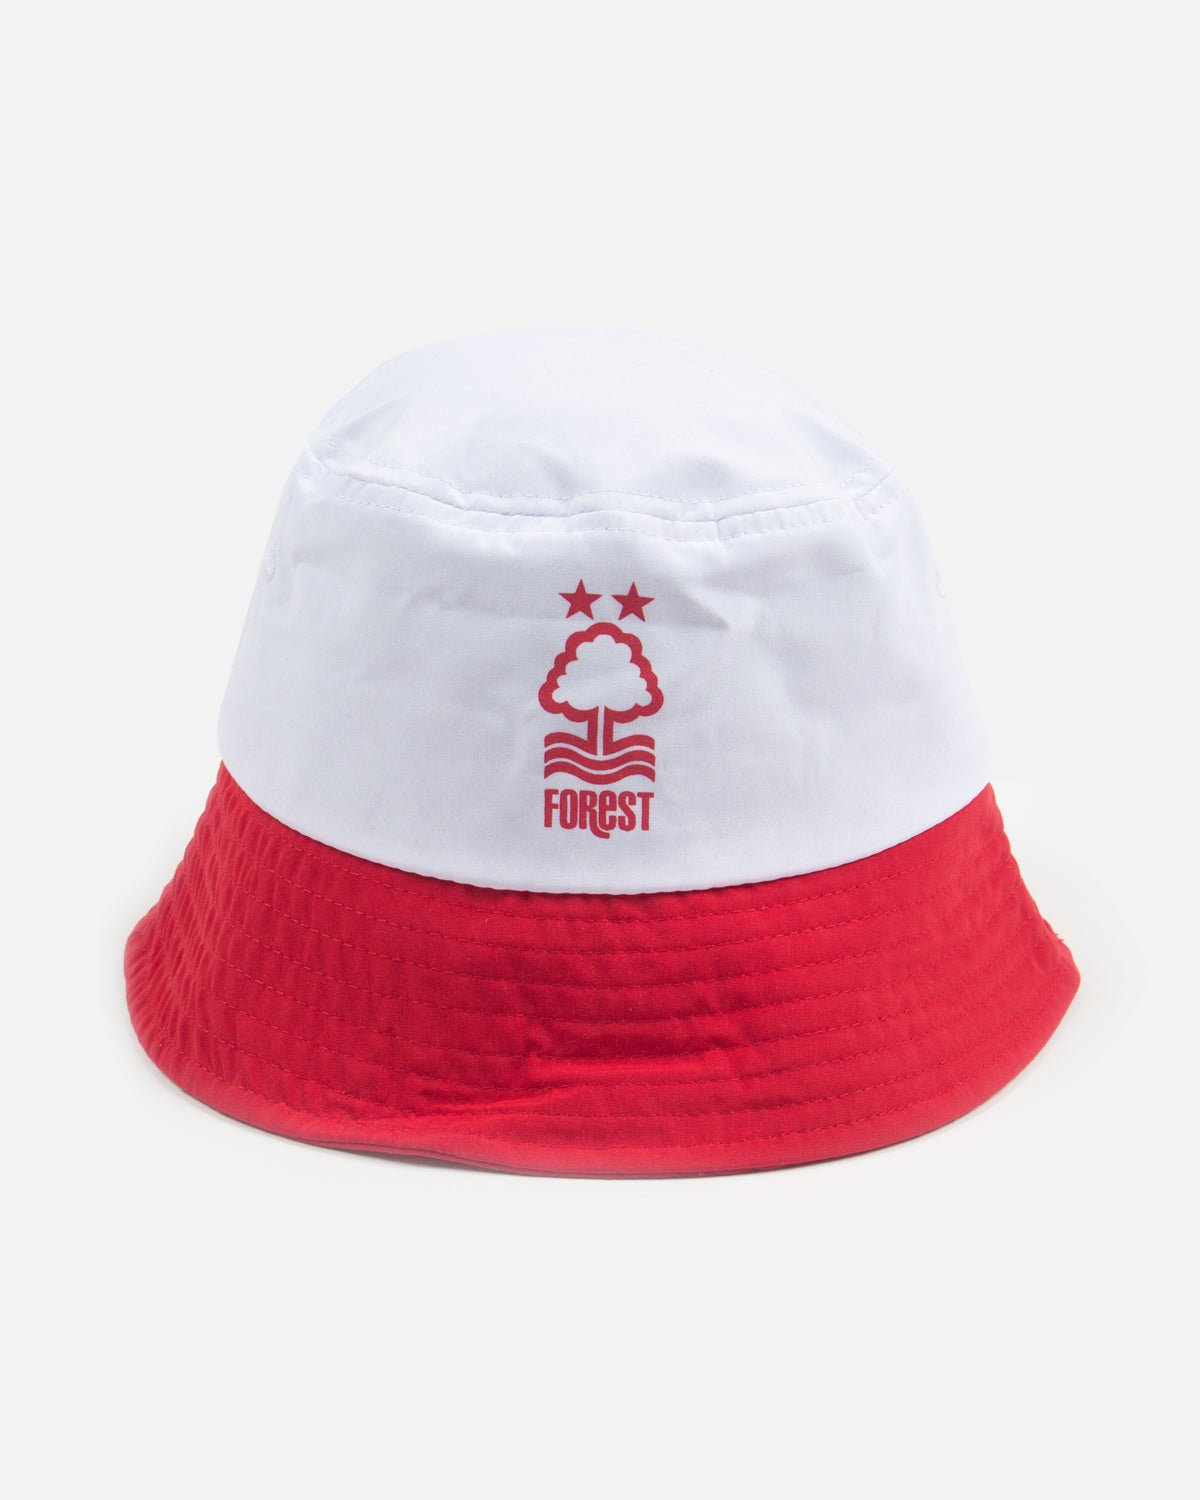 NFFC White/Red Bucket Hat - Nottingham Forest FC